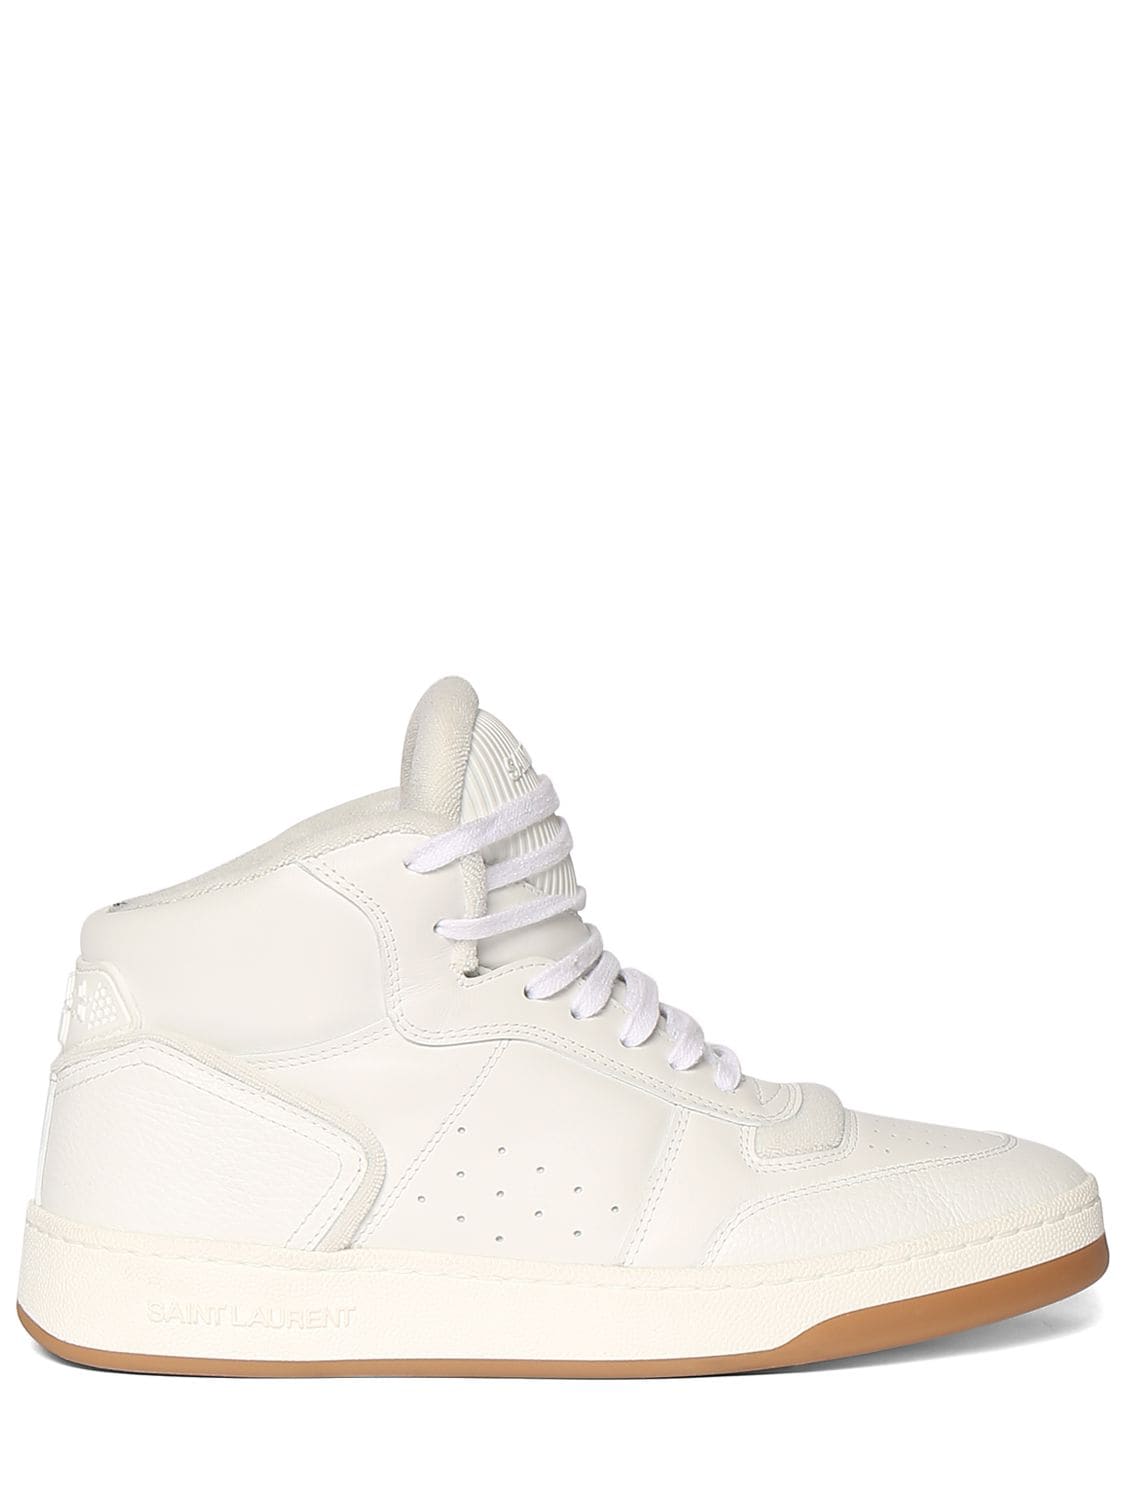 Saint Laurent Sl/80 Leather Mid Top Sneakers In White